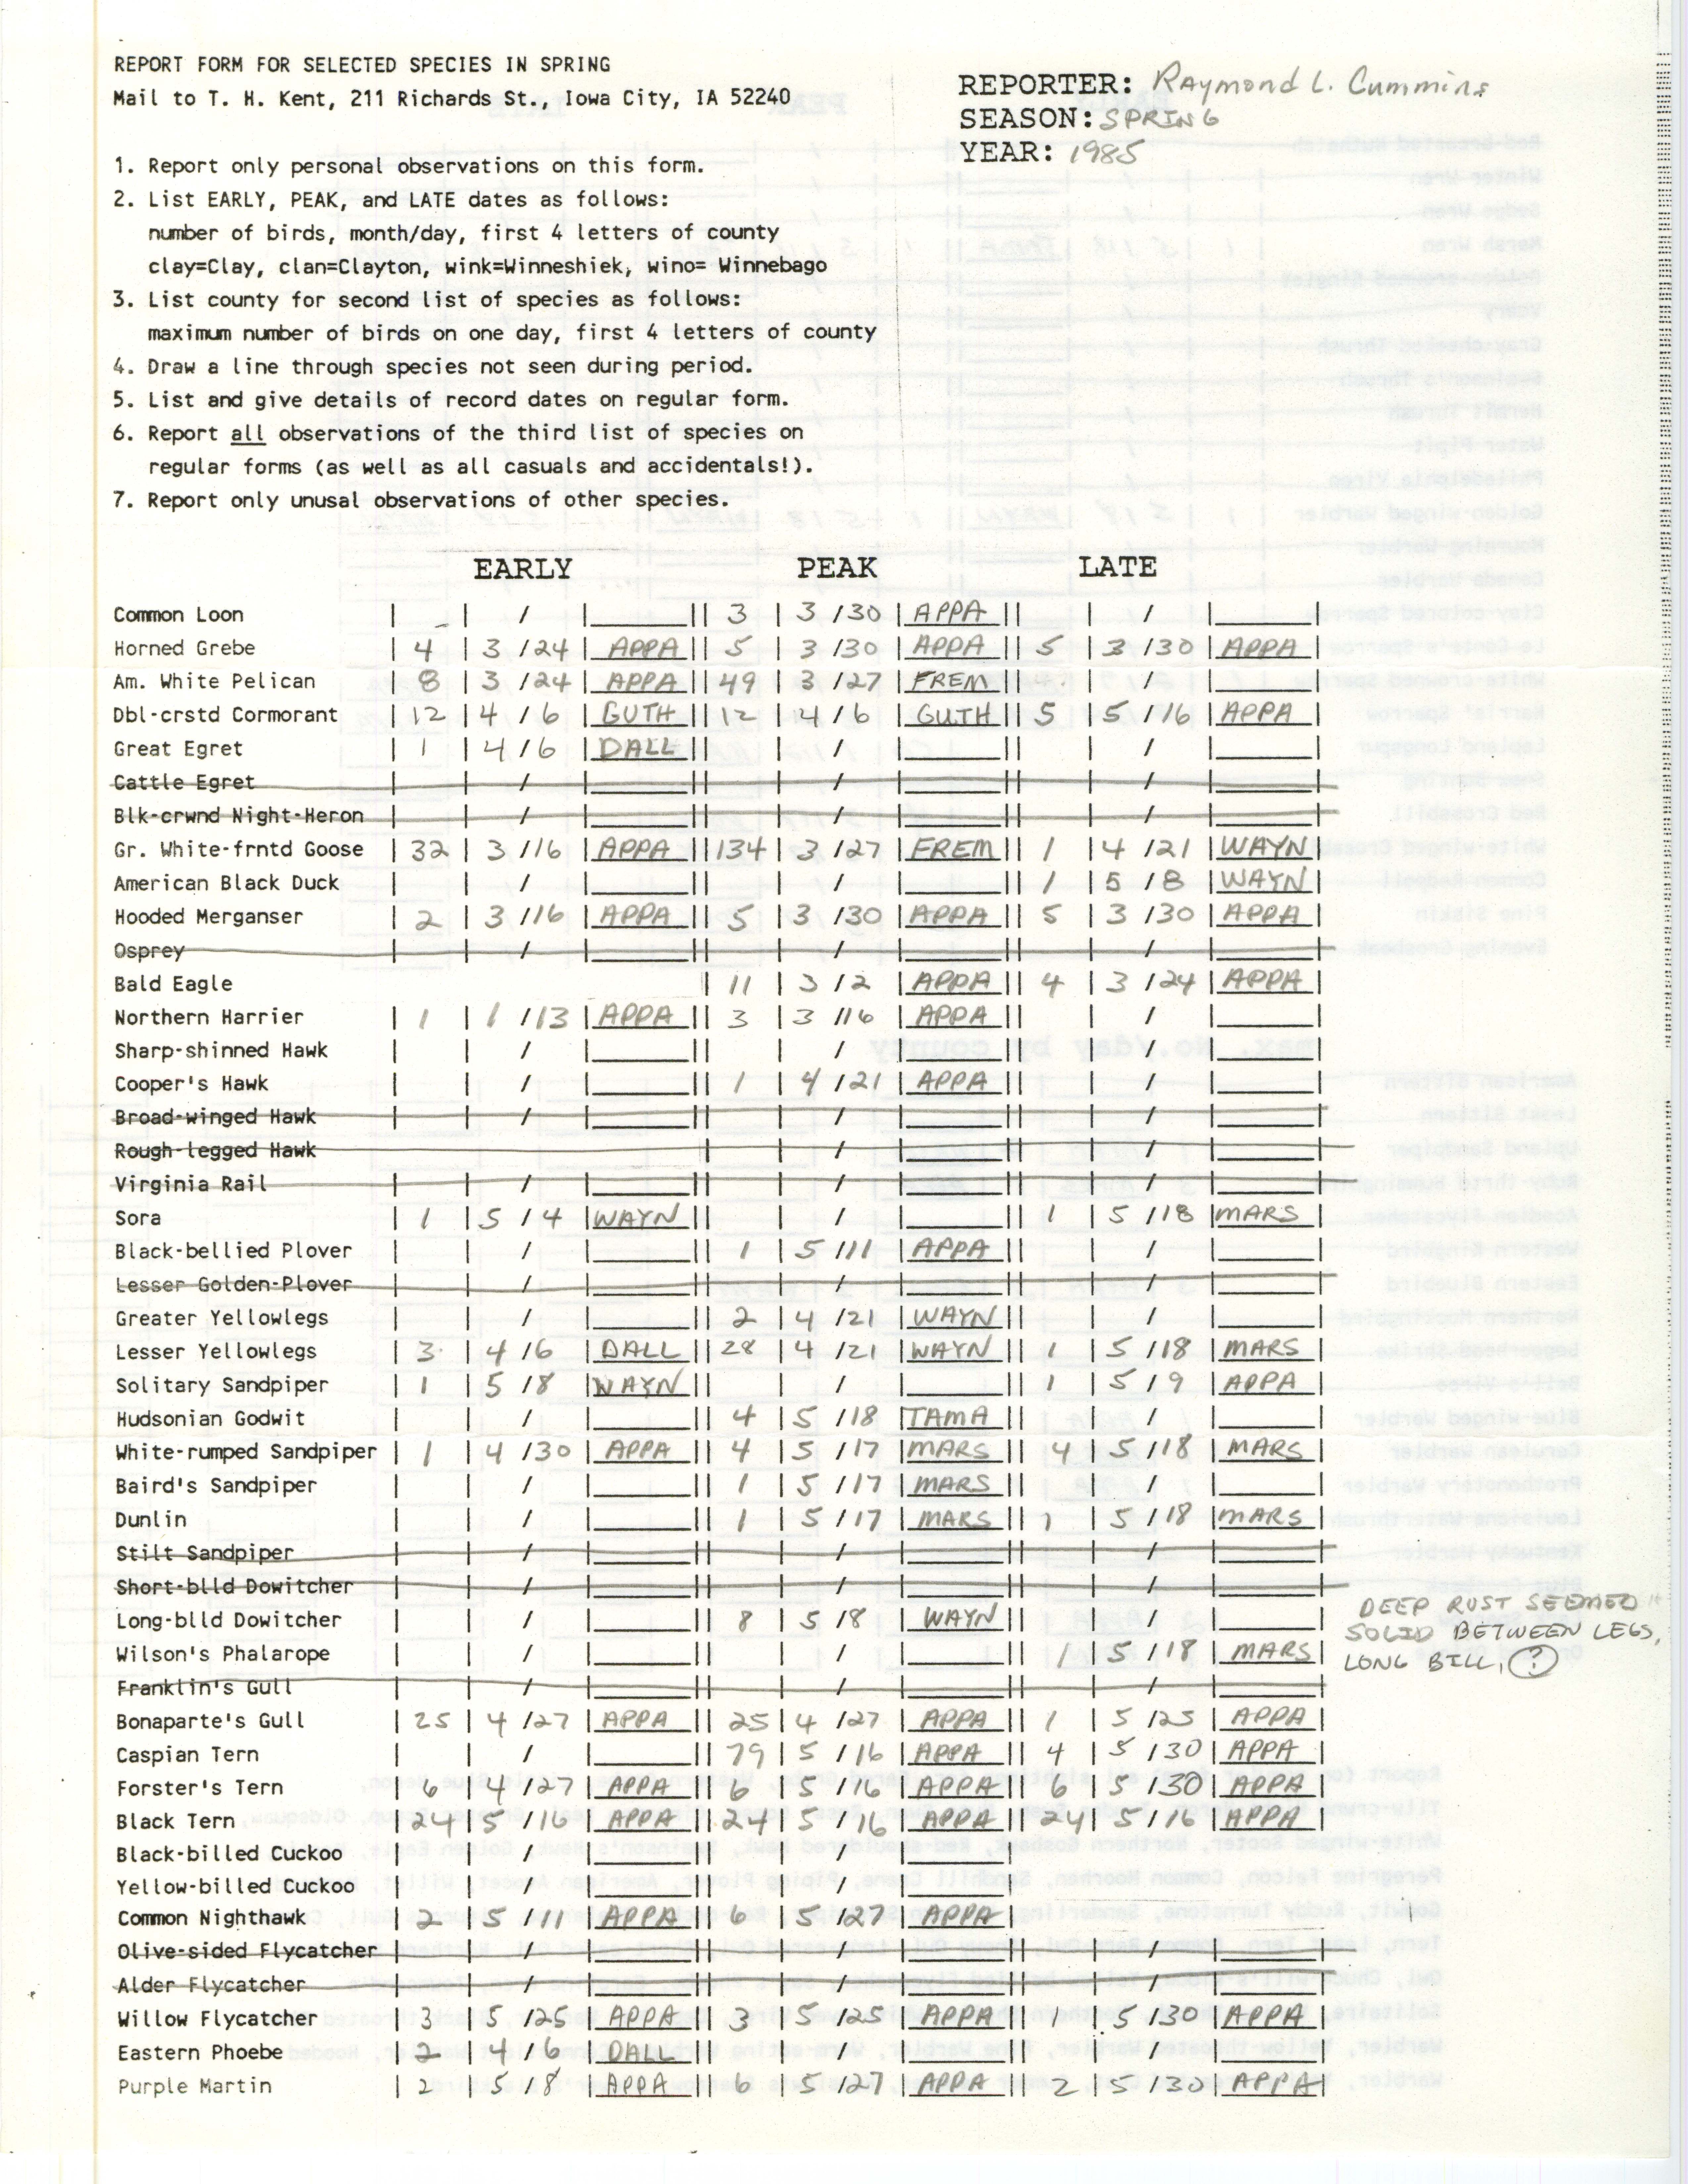 Report form for selected species in spring, contributed by Raymond L. Cummins, spring 1985